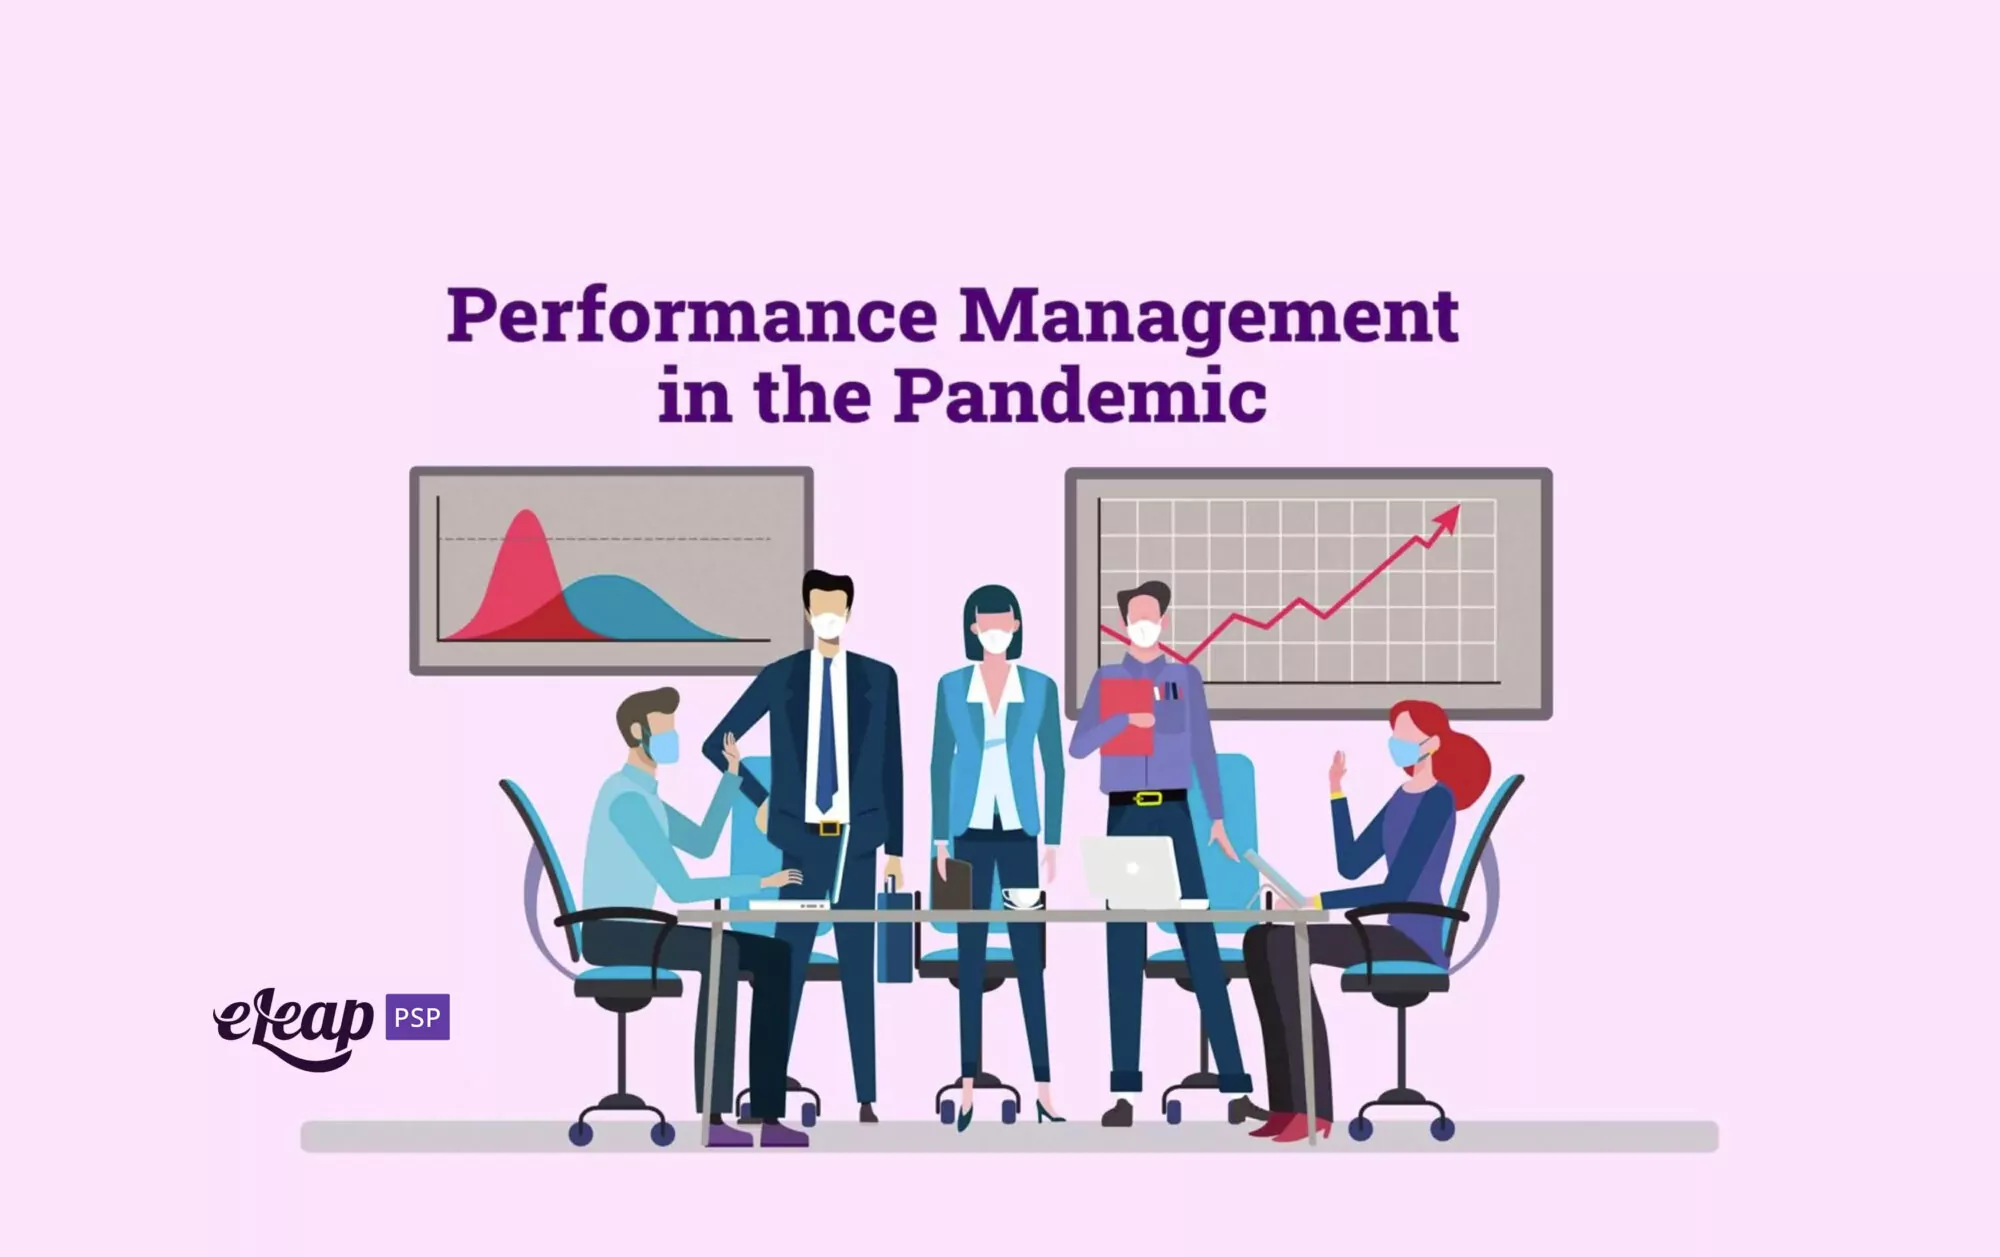 Performance Management in the Pandemic